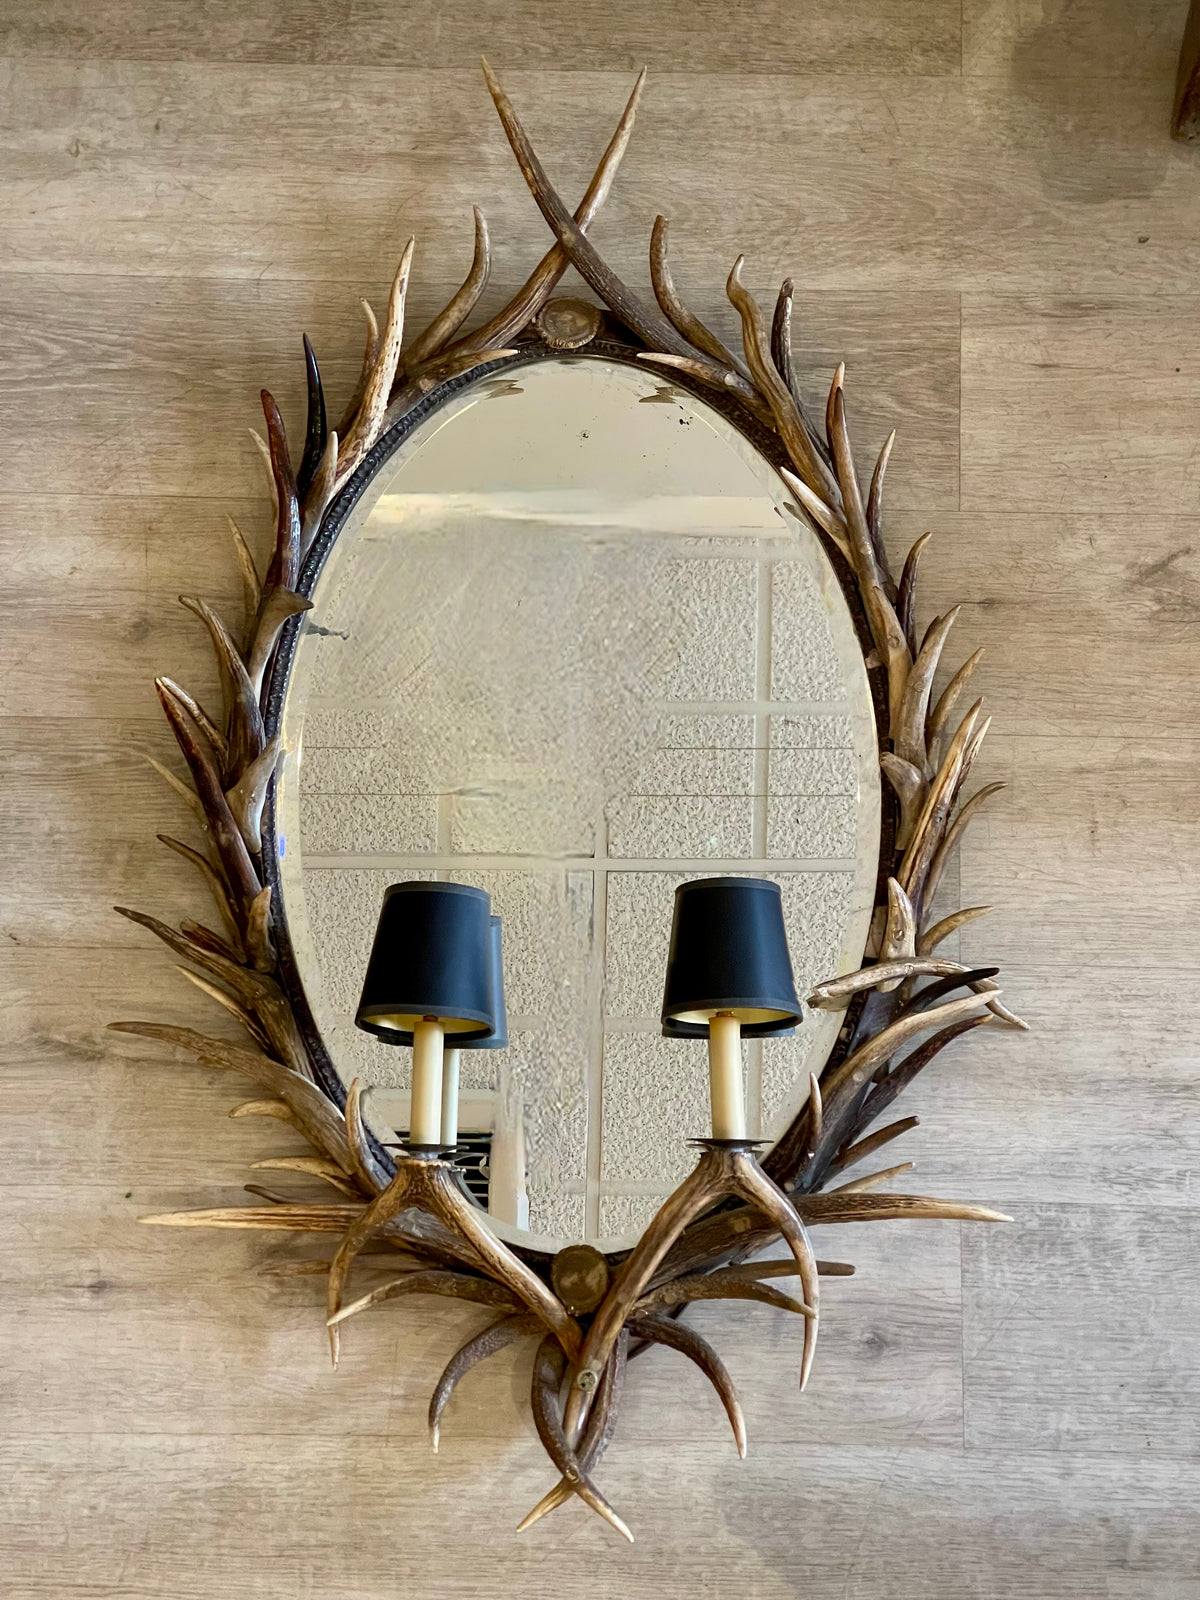 Antler-Framed Oval Wall Mirror Late 19th Century-Early 20th Century